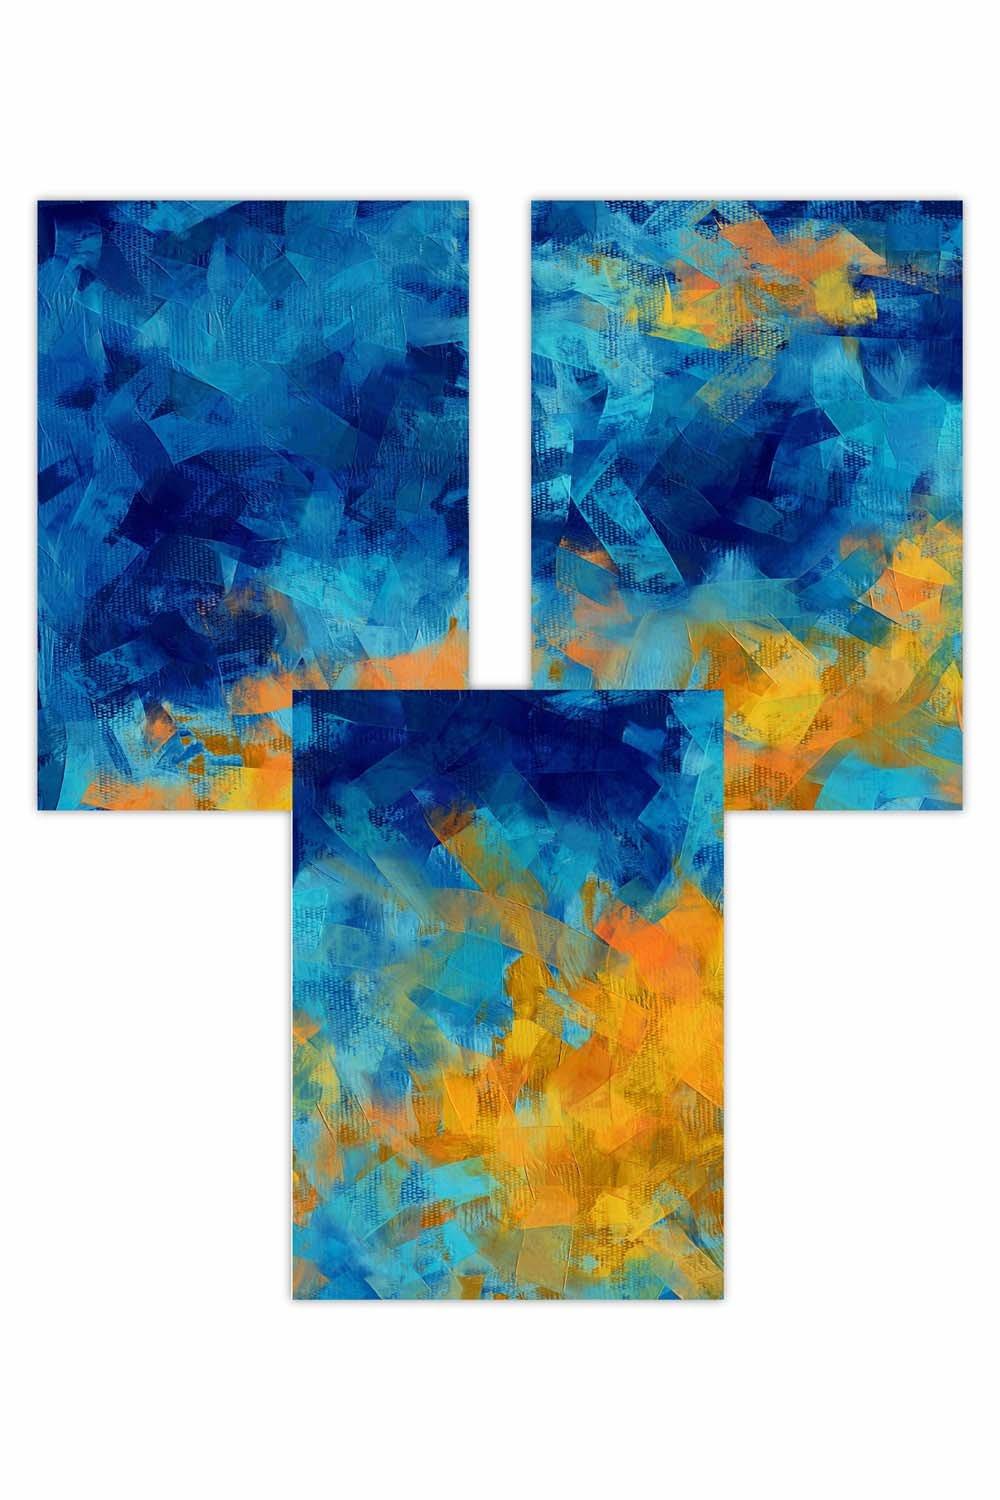 Set of 3 Geometric Abstract Cerulean Shore In Blue and Yellow Art Posters